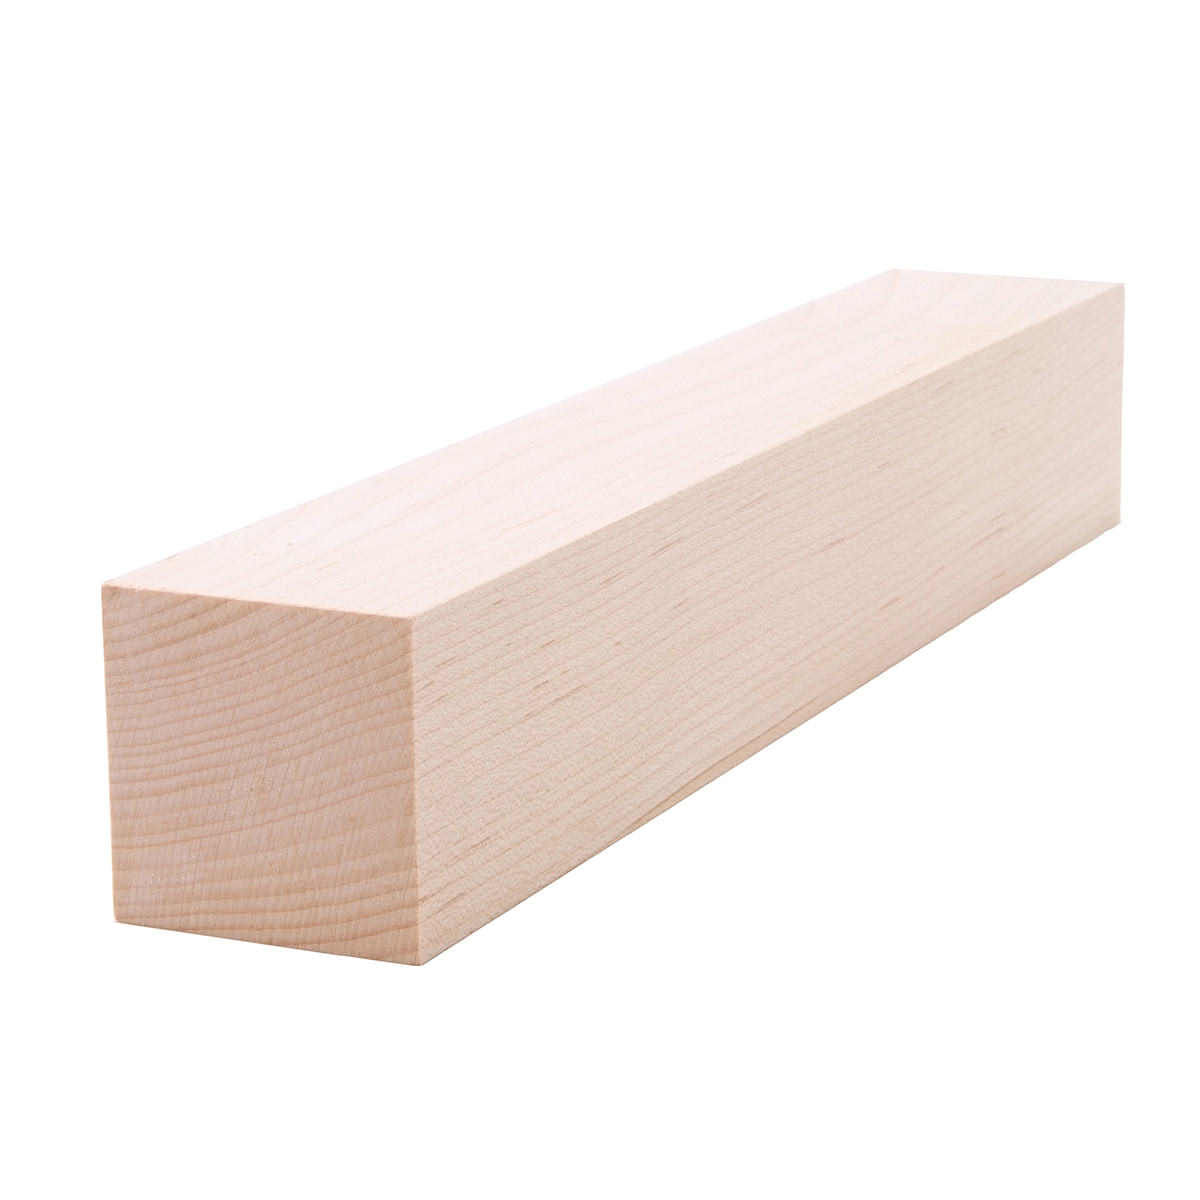 2x2 (13/4" x 13/4") Hard Maple S4S Lumber & Square Stock from Baird Brothers